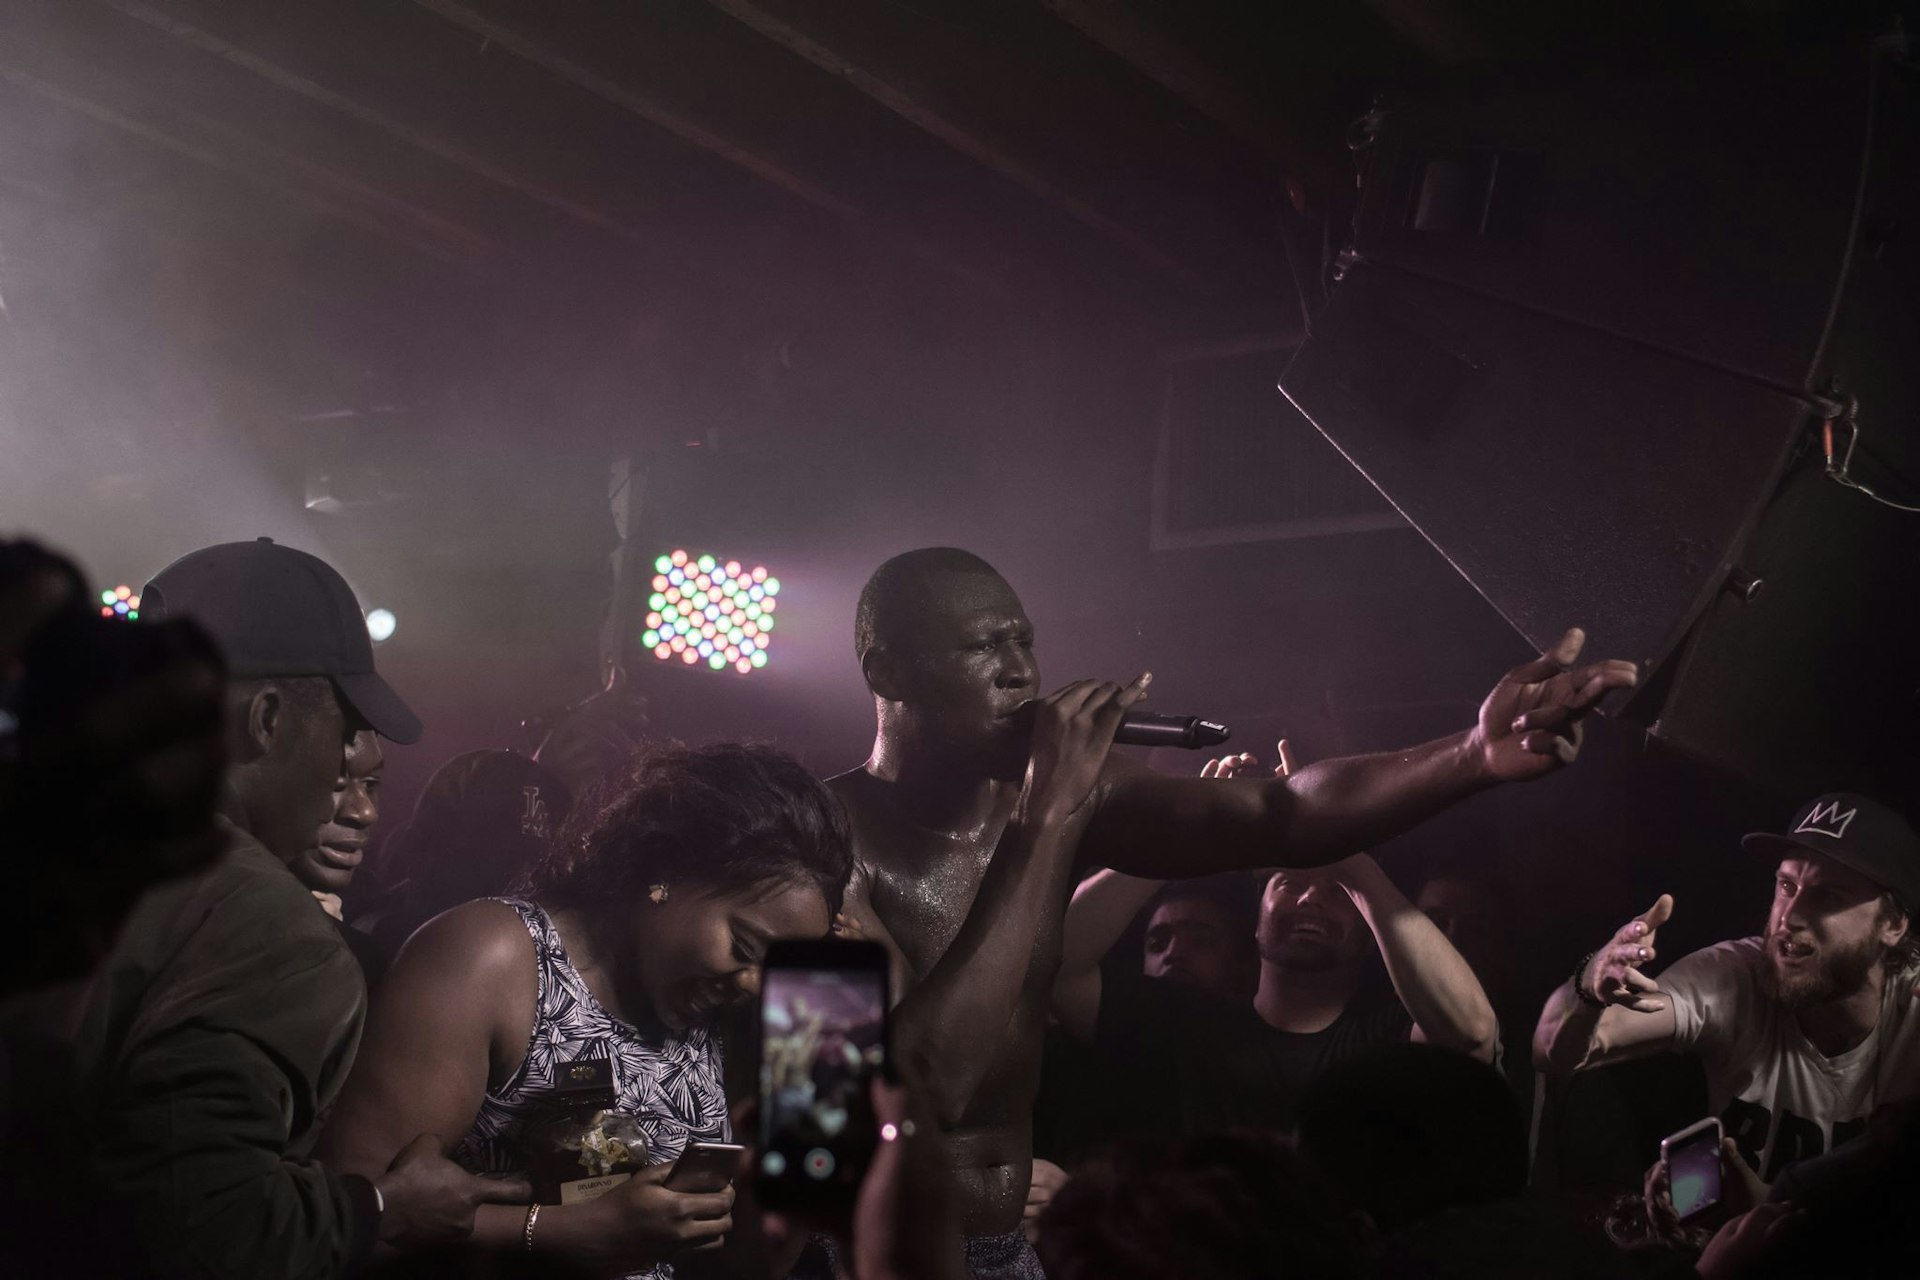 Video: The rise of grime in the United States